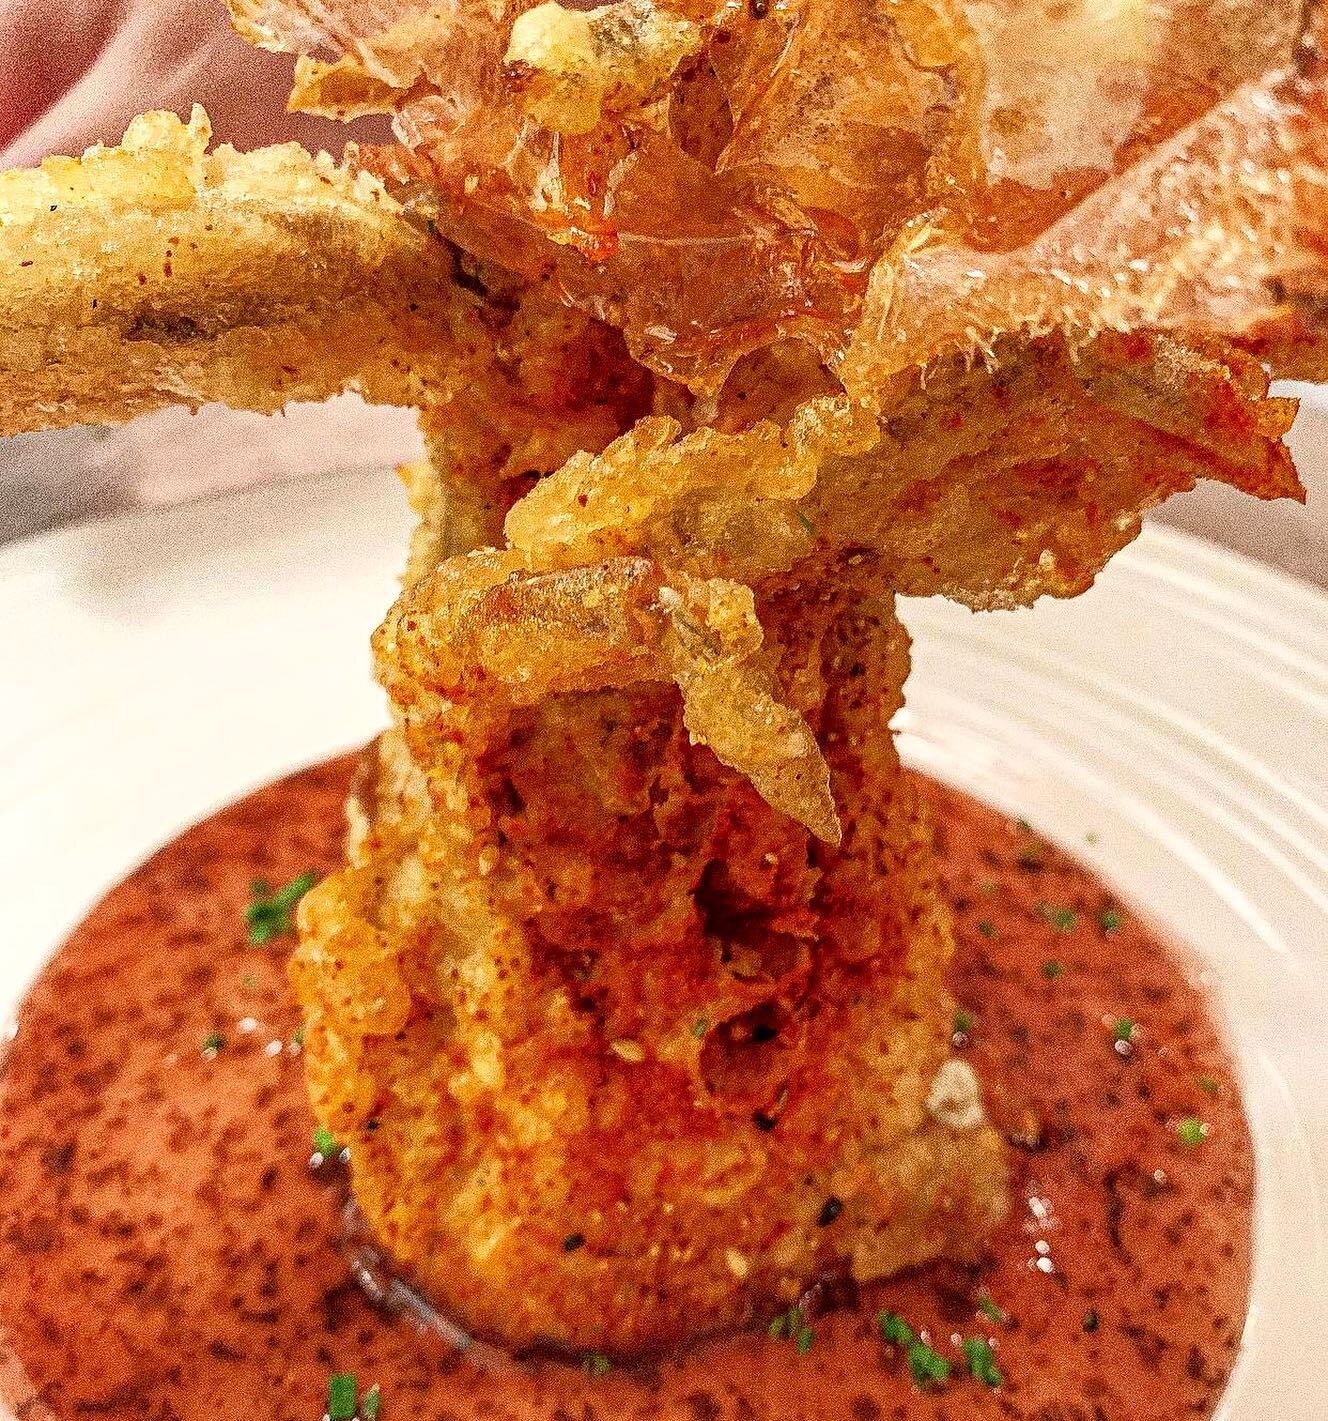 Our famous UME CRAB IS BACK!! This is a limited-time offer menu! Live Maryland soft shell crab, lightly tempura, and served with ume shiso sauce. 🦀🦀🦀
.
.
.
.

#oishii #oishiiboston #support #supportlocal #southend #bostonsouthend #southendboston #